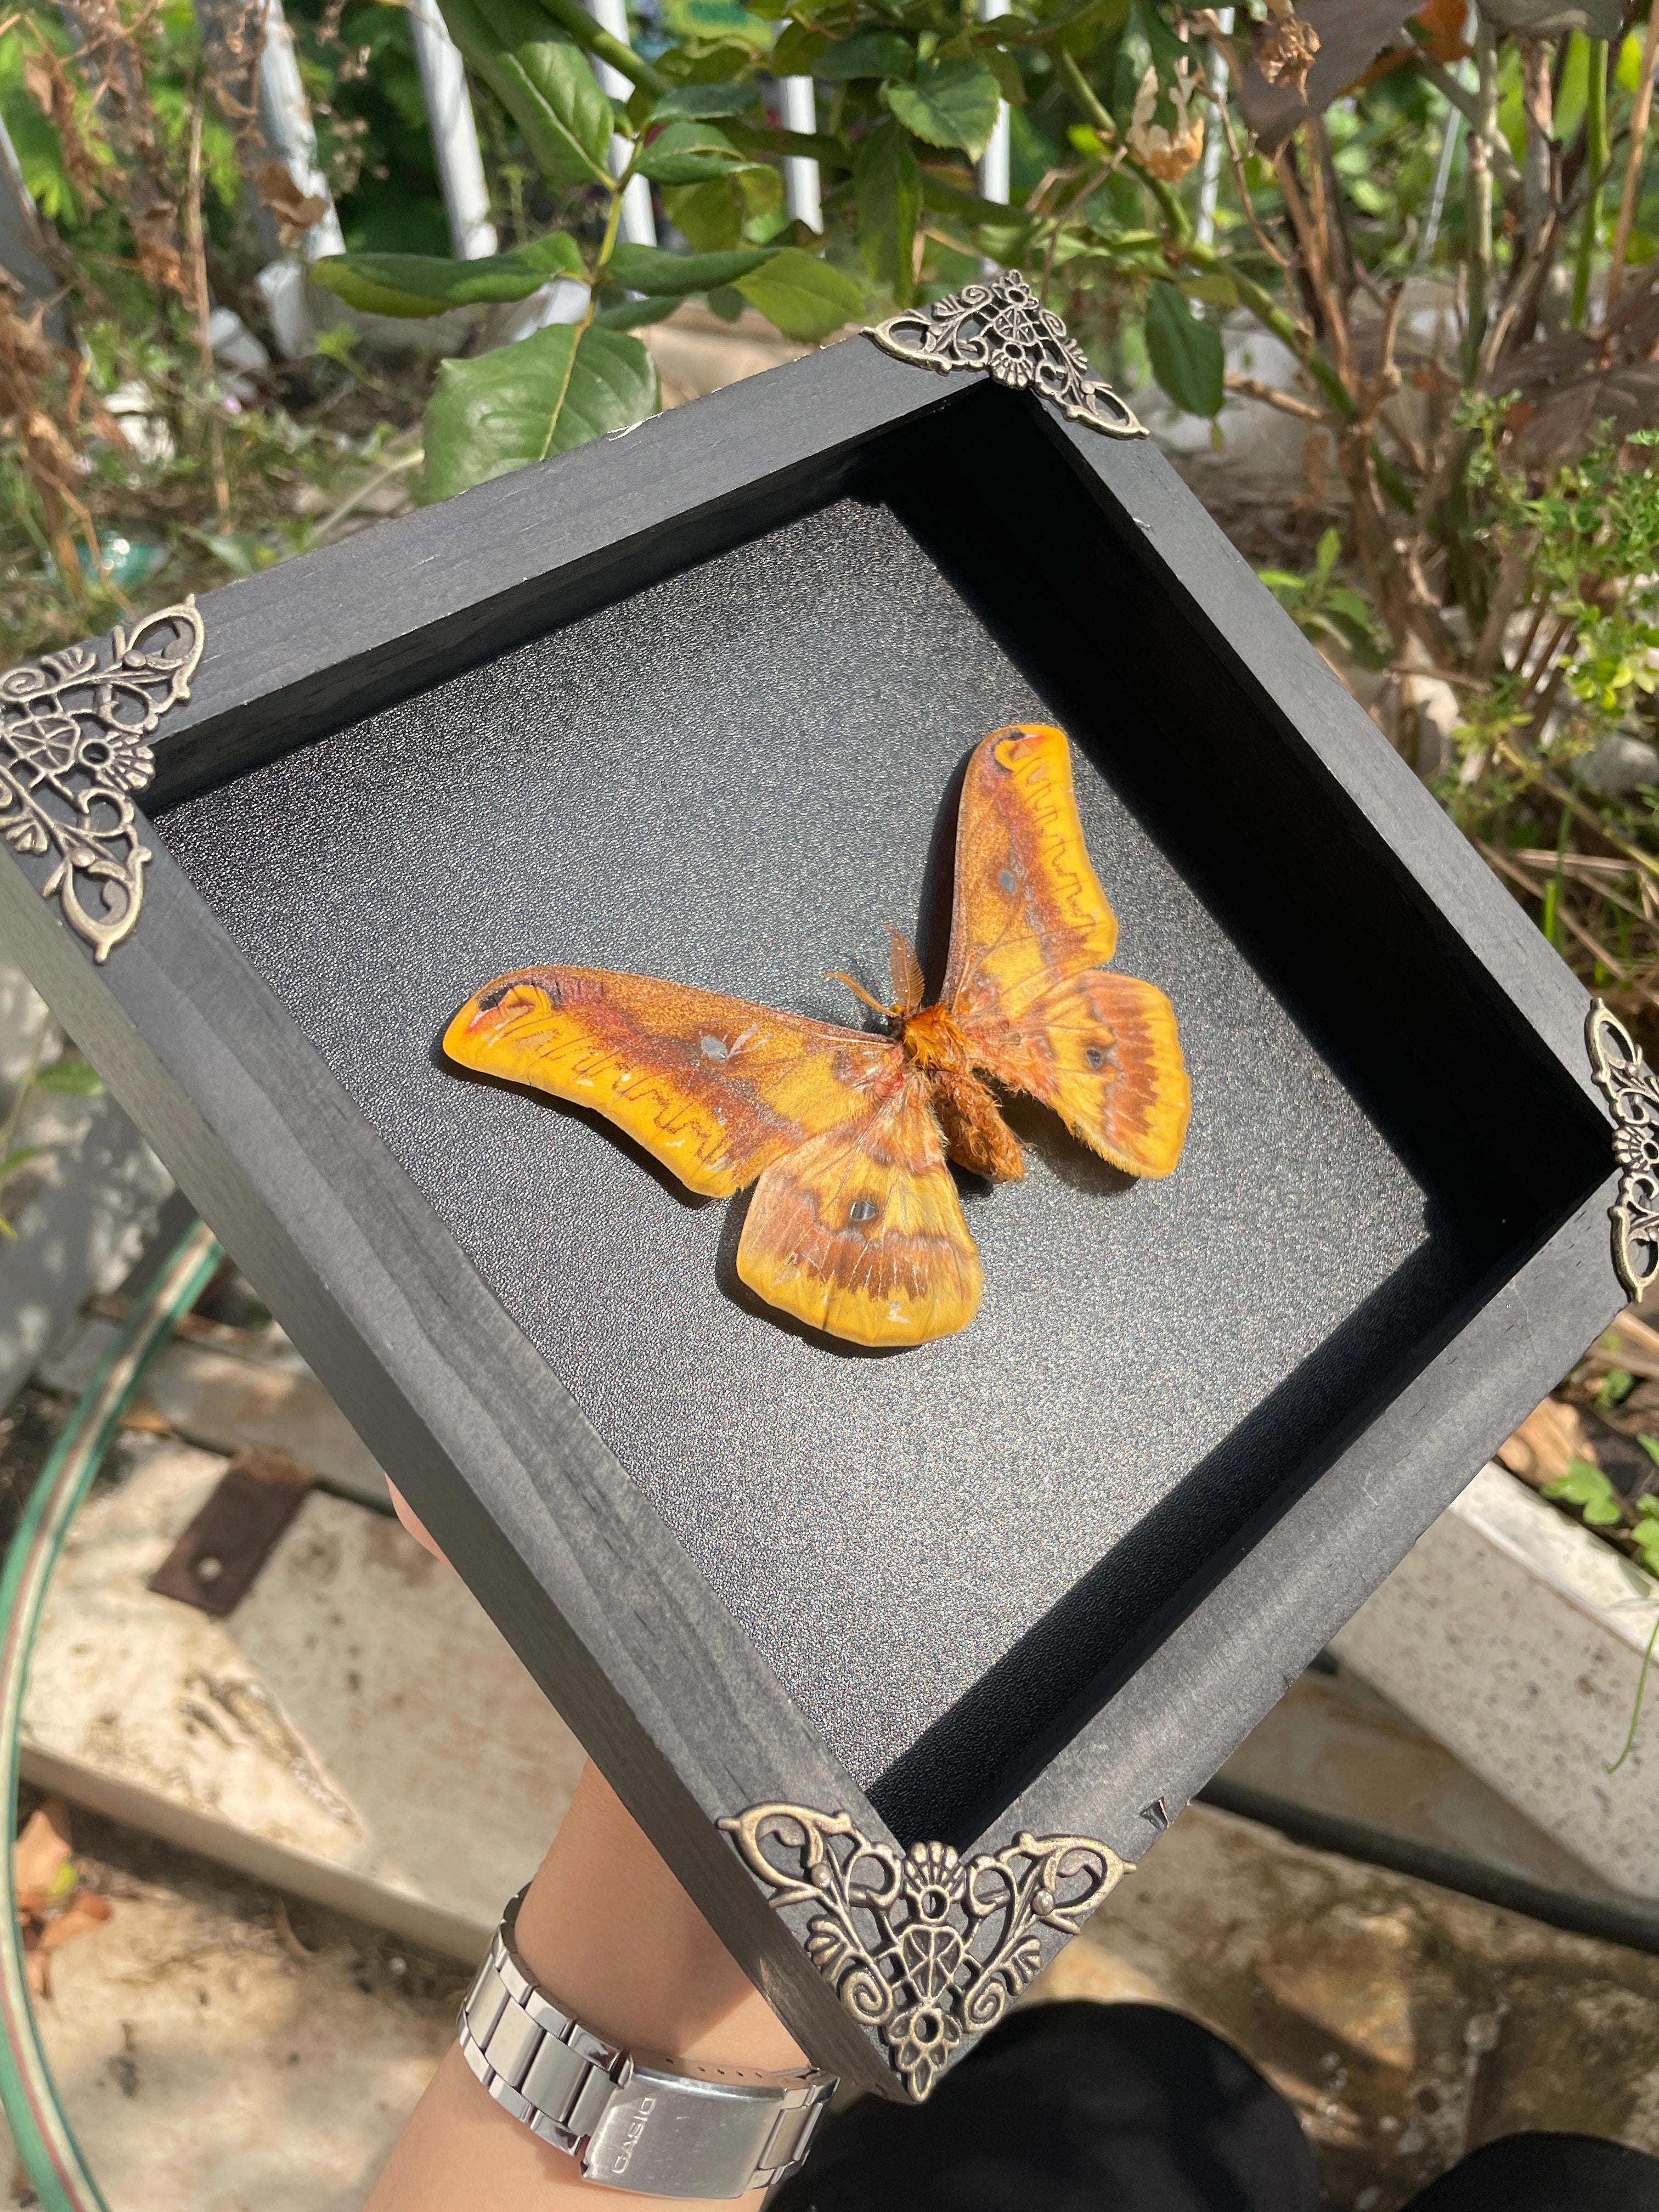 Real Rhodinia Framed Silk Moth Wooden Shadow Box Insect Taxidermy Handmade Display Specimen Hanging Wall Home Decor Living Reading Gallery K18-40-DE